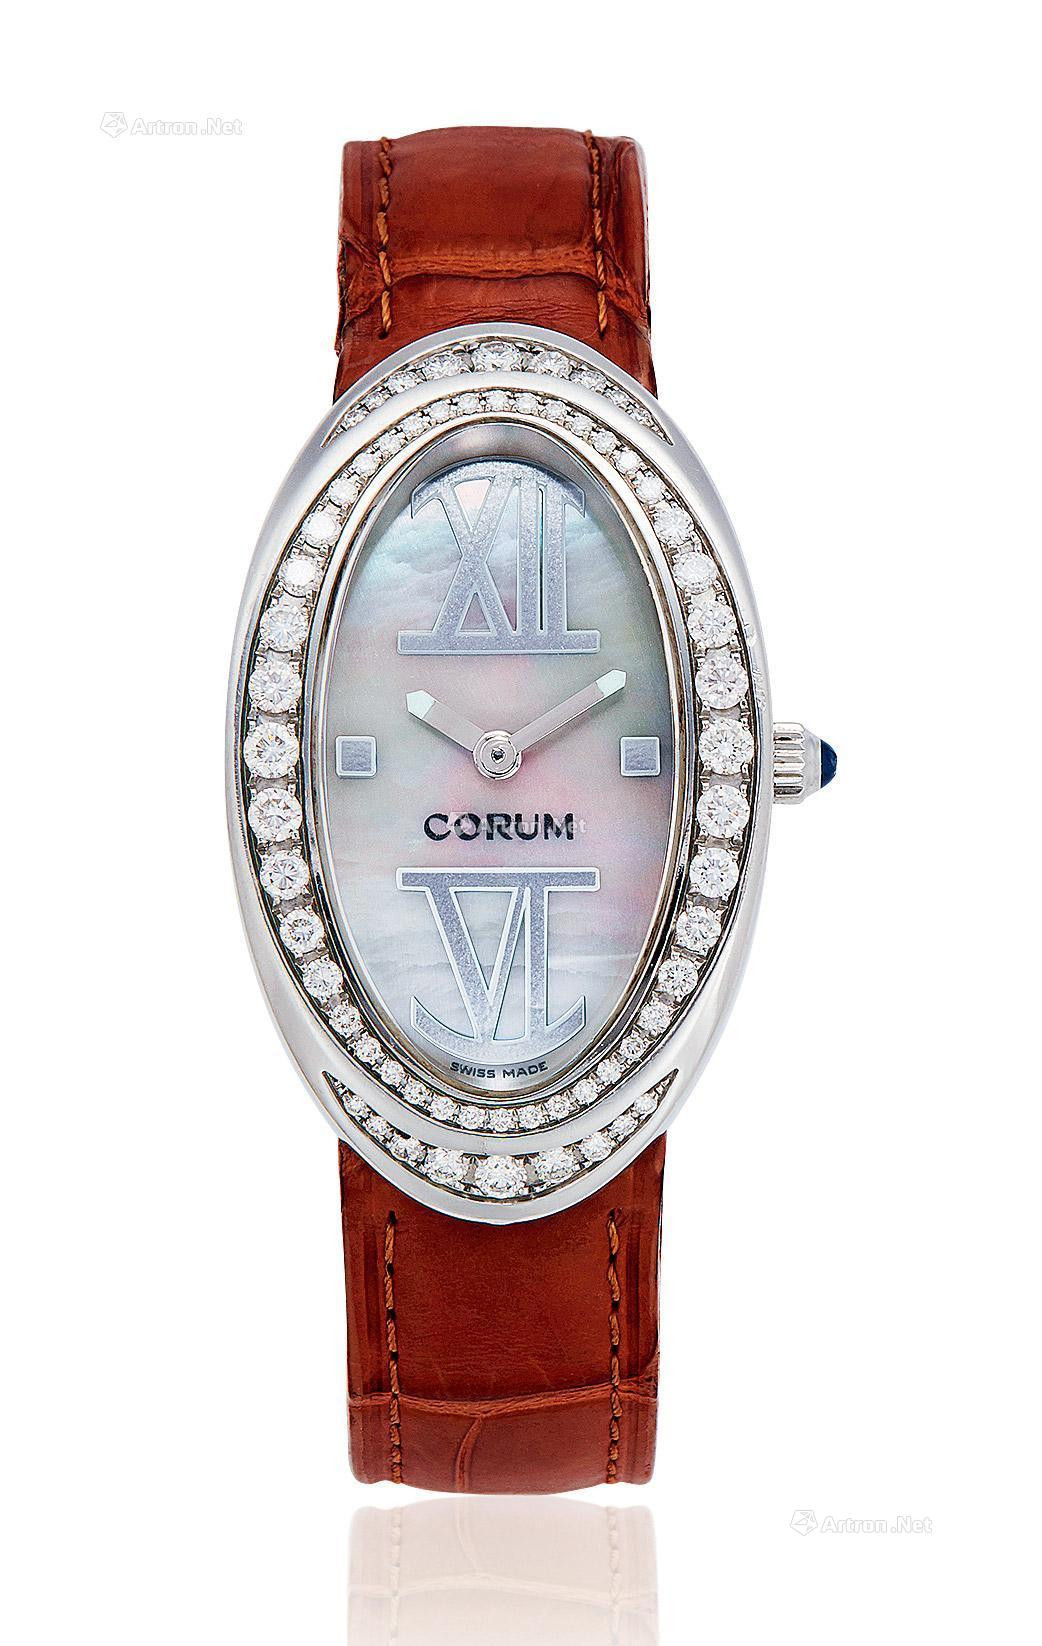 CORUM A LADY’S WHITE GOLD AND DIAMOND-SET WRISTWATCH WITH MOTHER-OF-PEARL DIAL